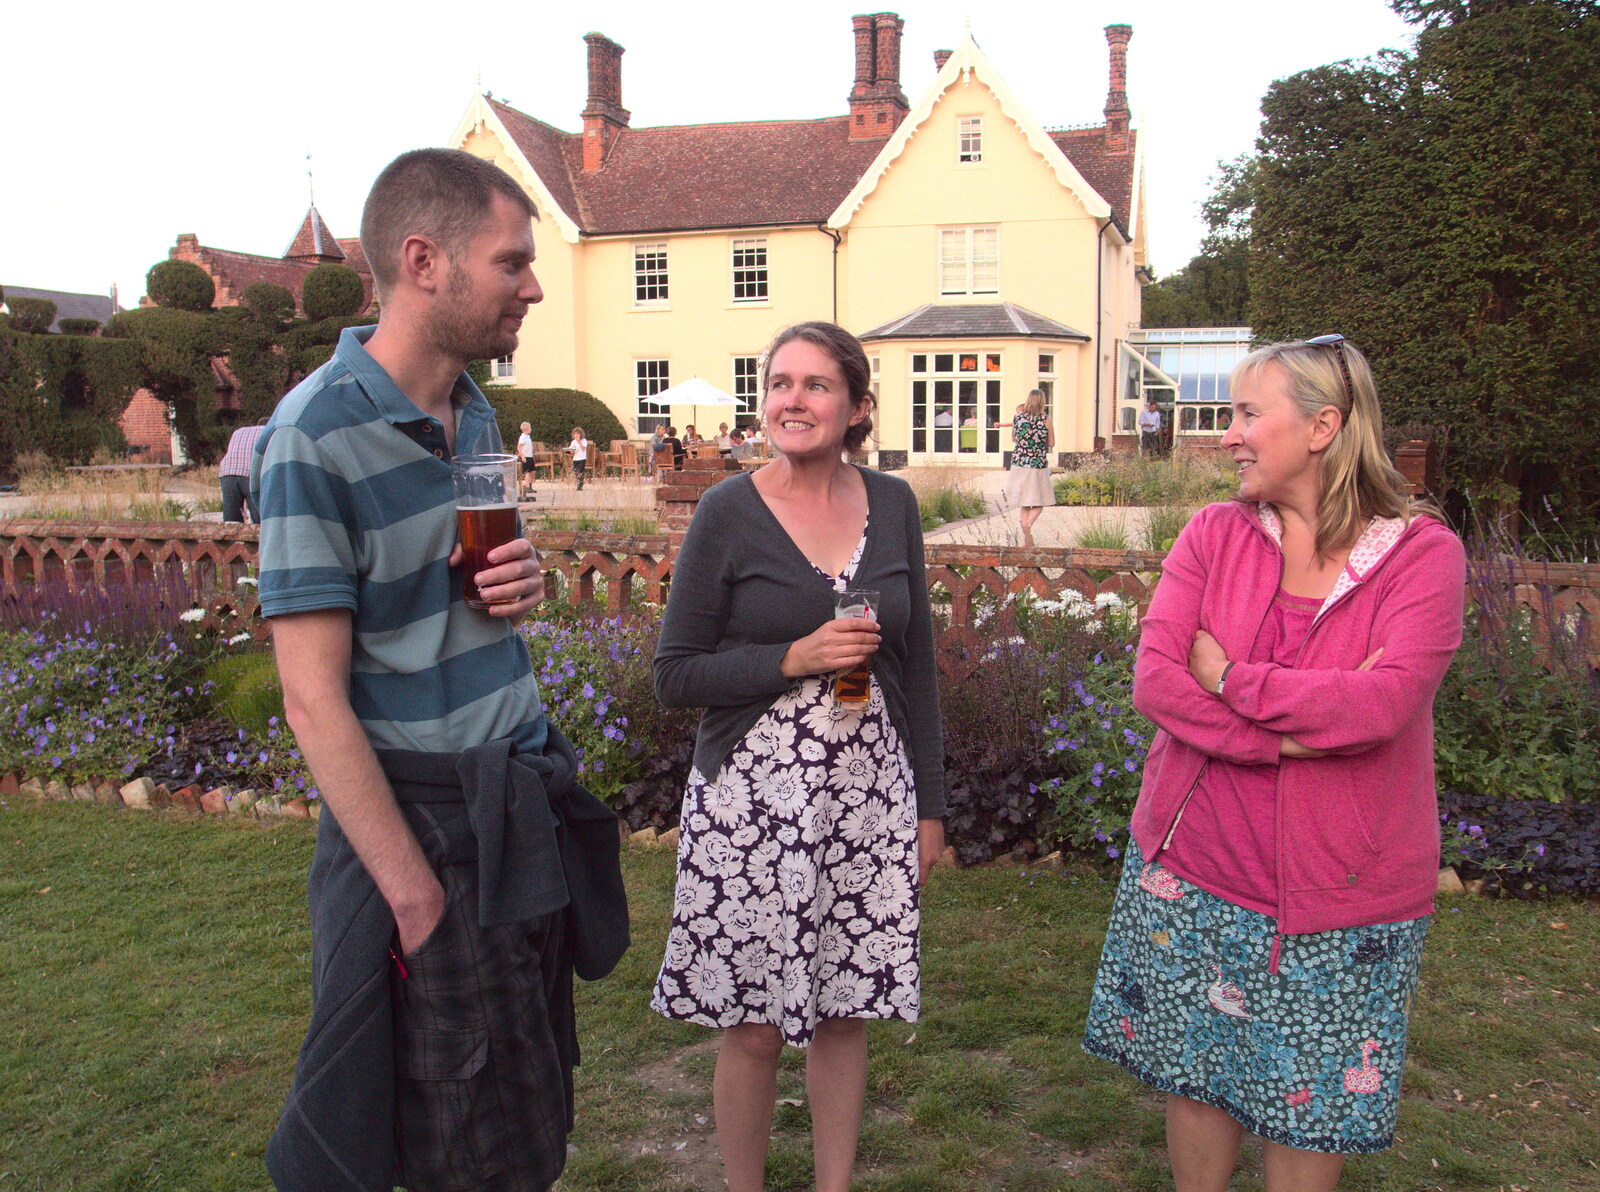 The Boy Phil, Isobel and Rachel from Soph the Roph's Birthday and The BBs at Pulham, Norfolk - 22nd July 2015